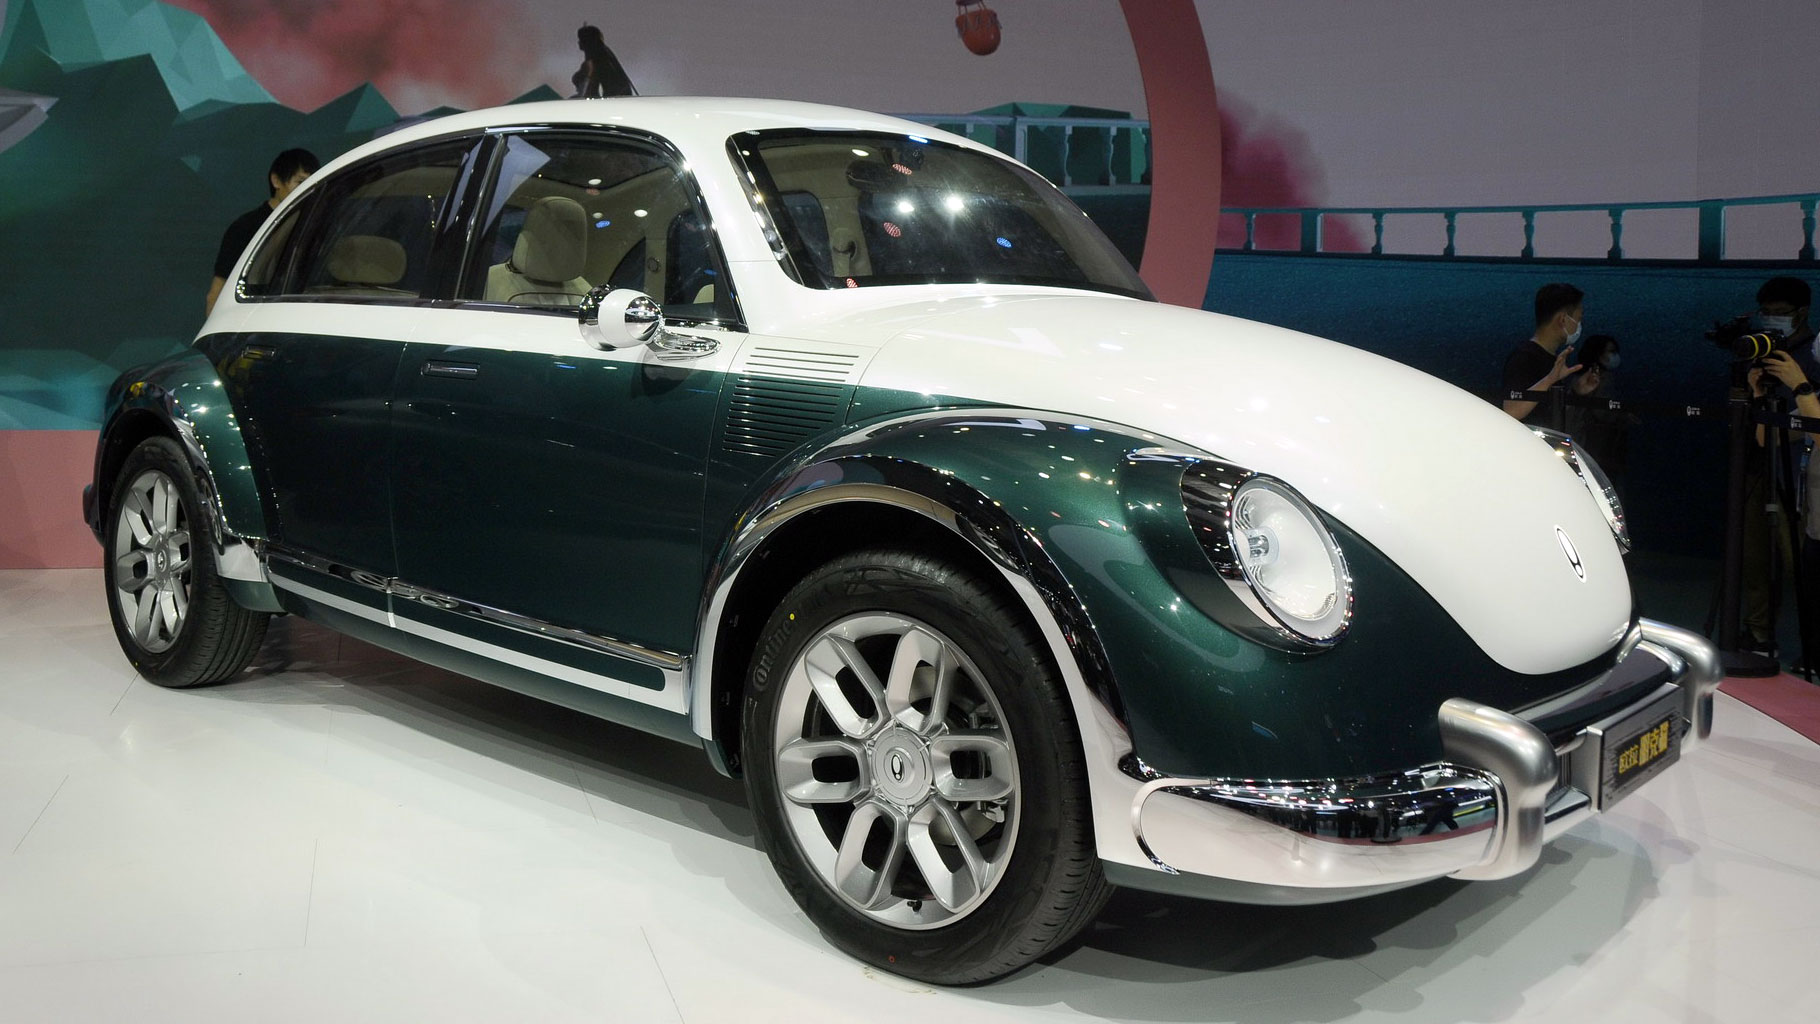 VW Lawyers Looking Into Great Wall’s ORA Electric Beetle RipOff From